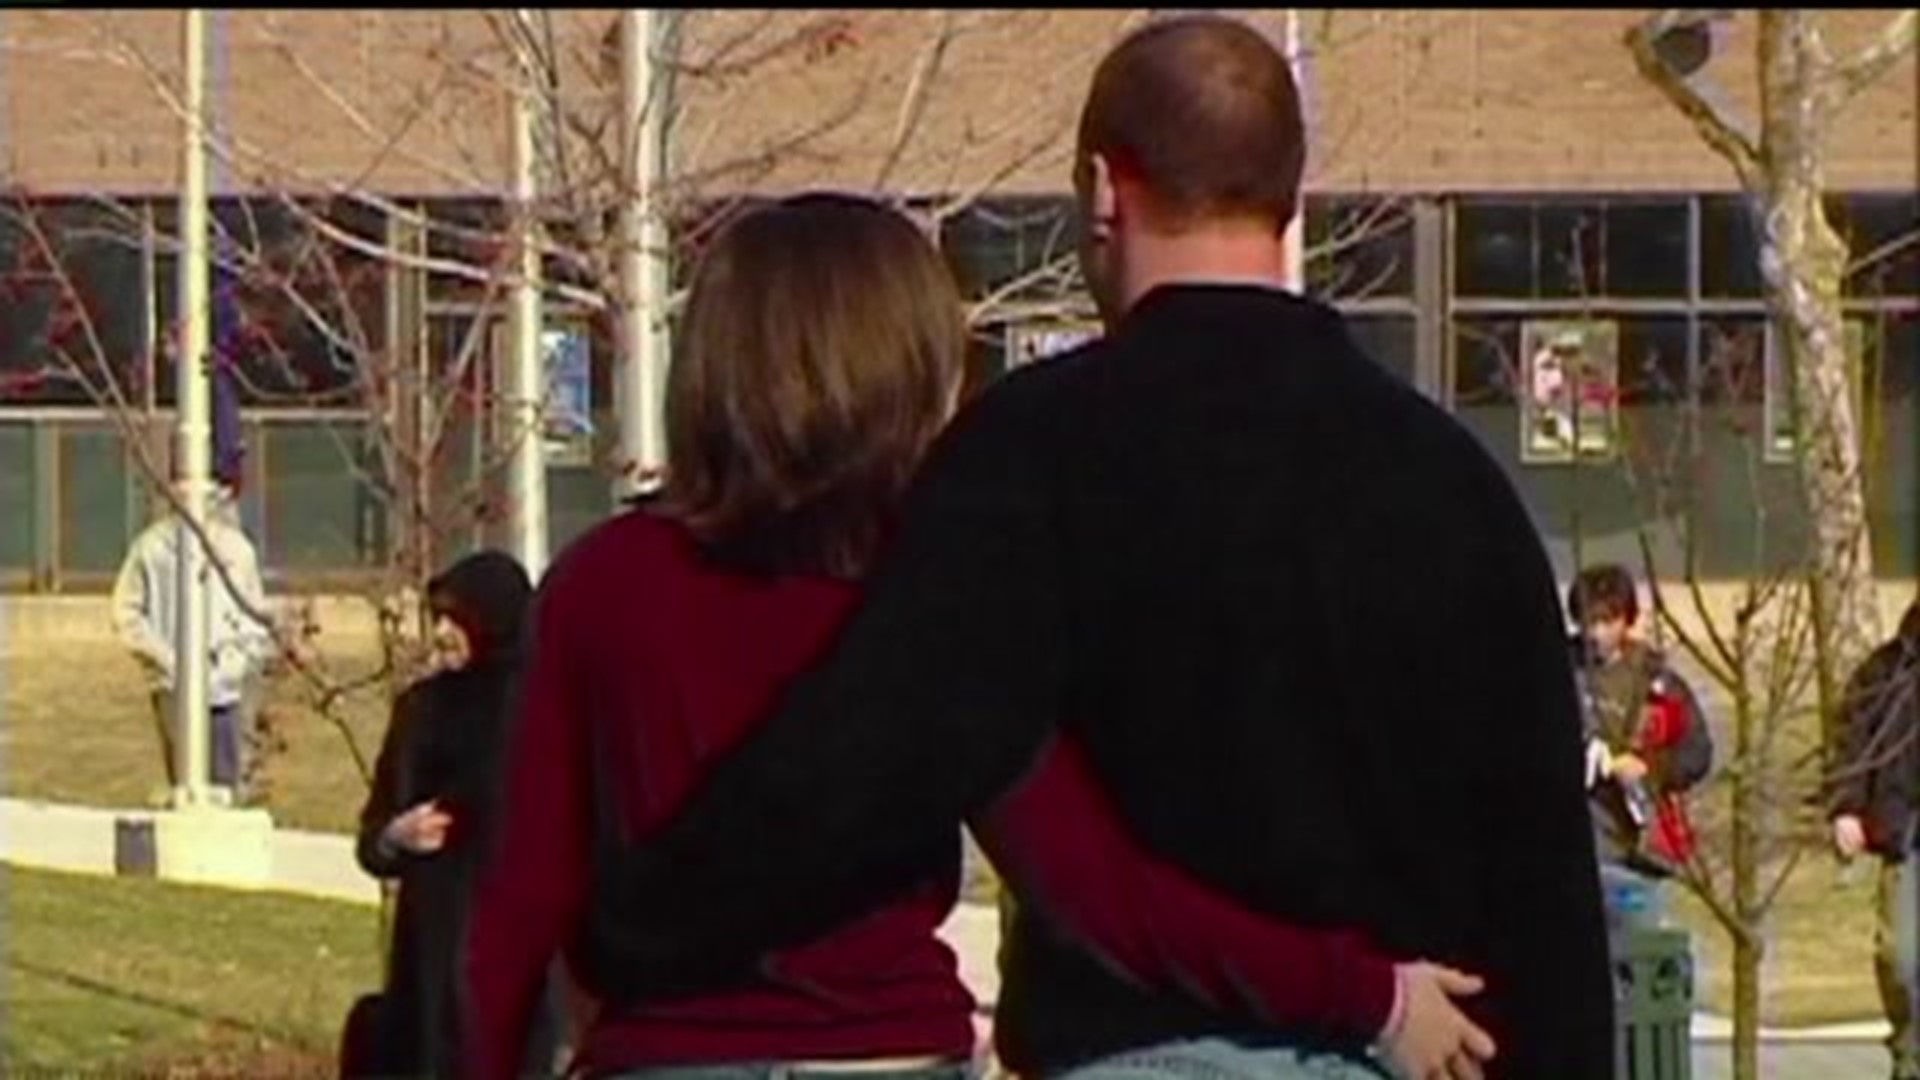 Adult dating site hack exposes sexual secrets of millions wqad picture picture picture